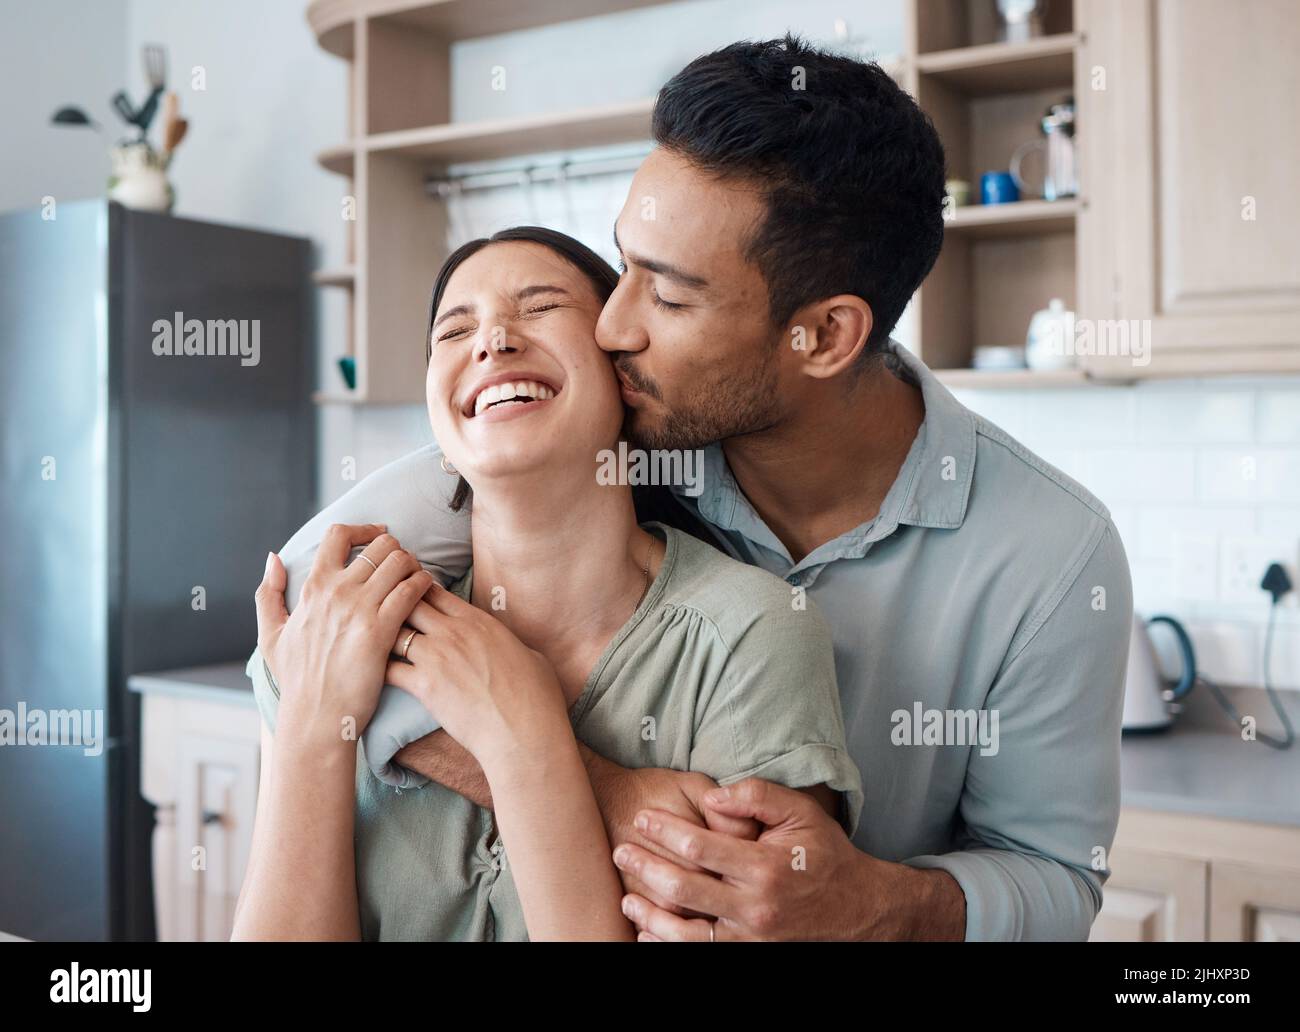 Cherishing this love with my love. a young couple spending time together at home. Stock Photo